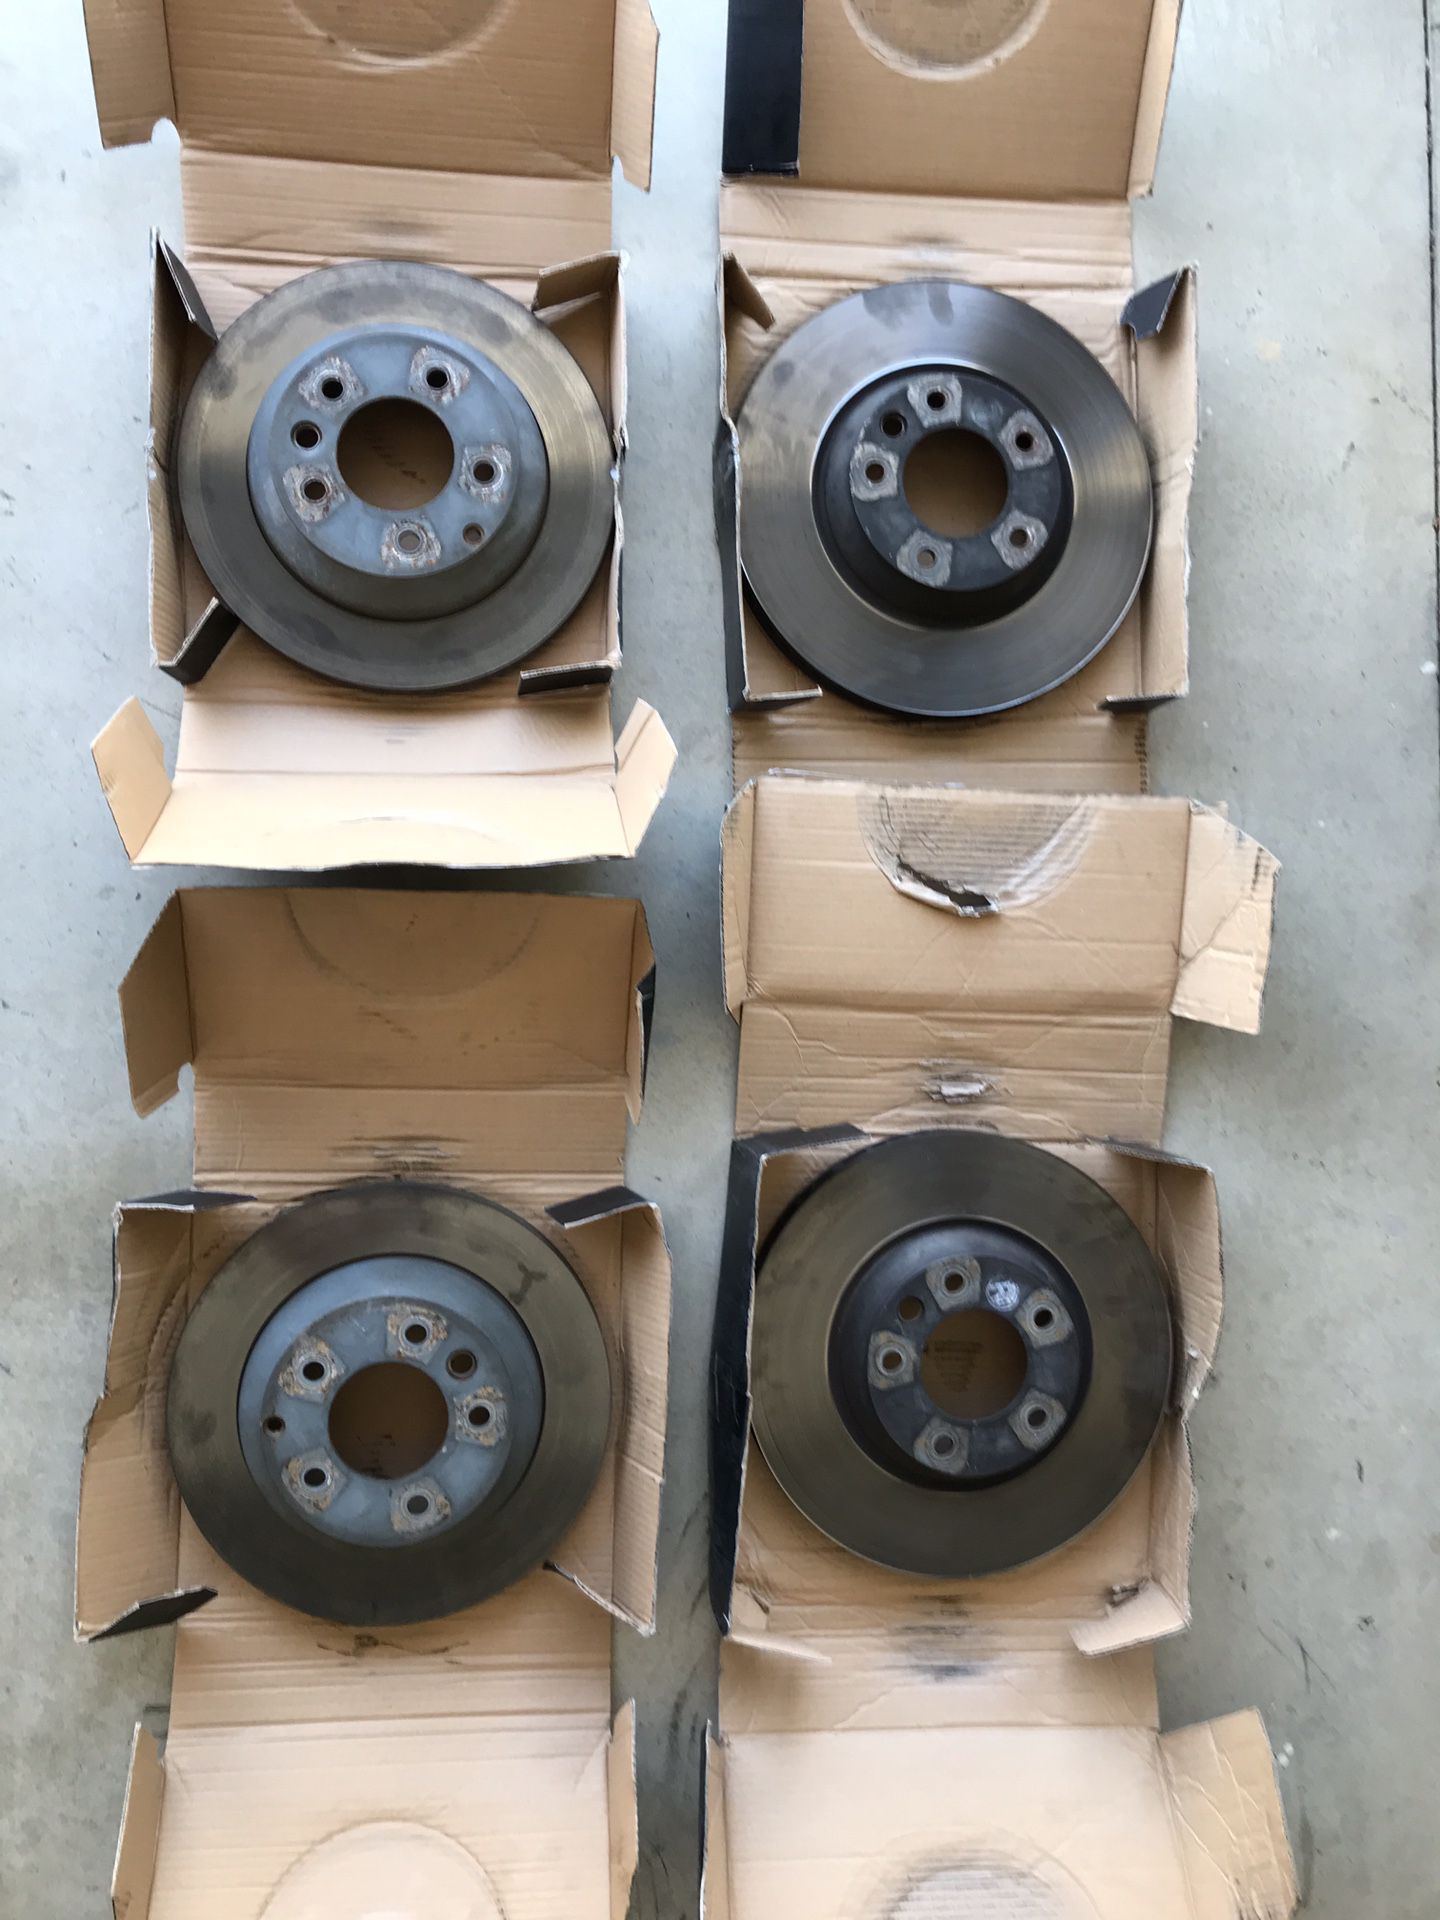 2006 Porsche Cayenne S Front + Rear Rotors. Good Condition. No grooves.